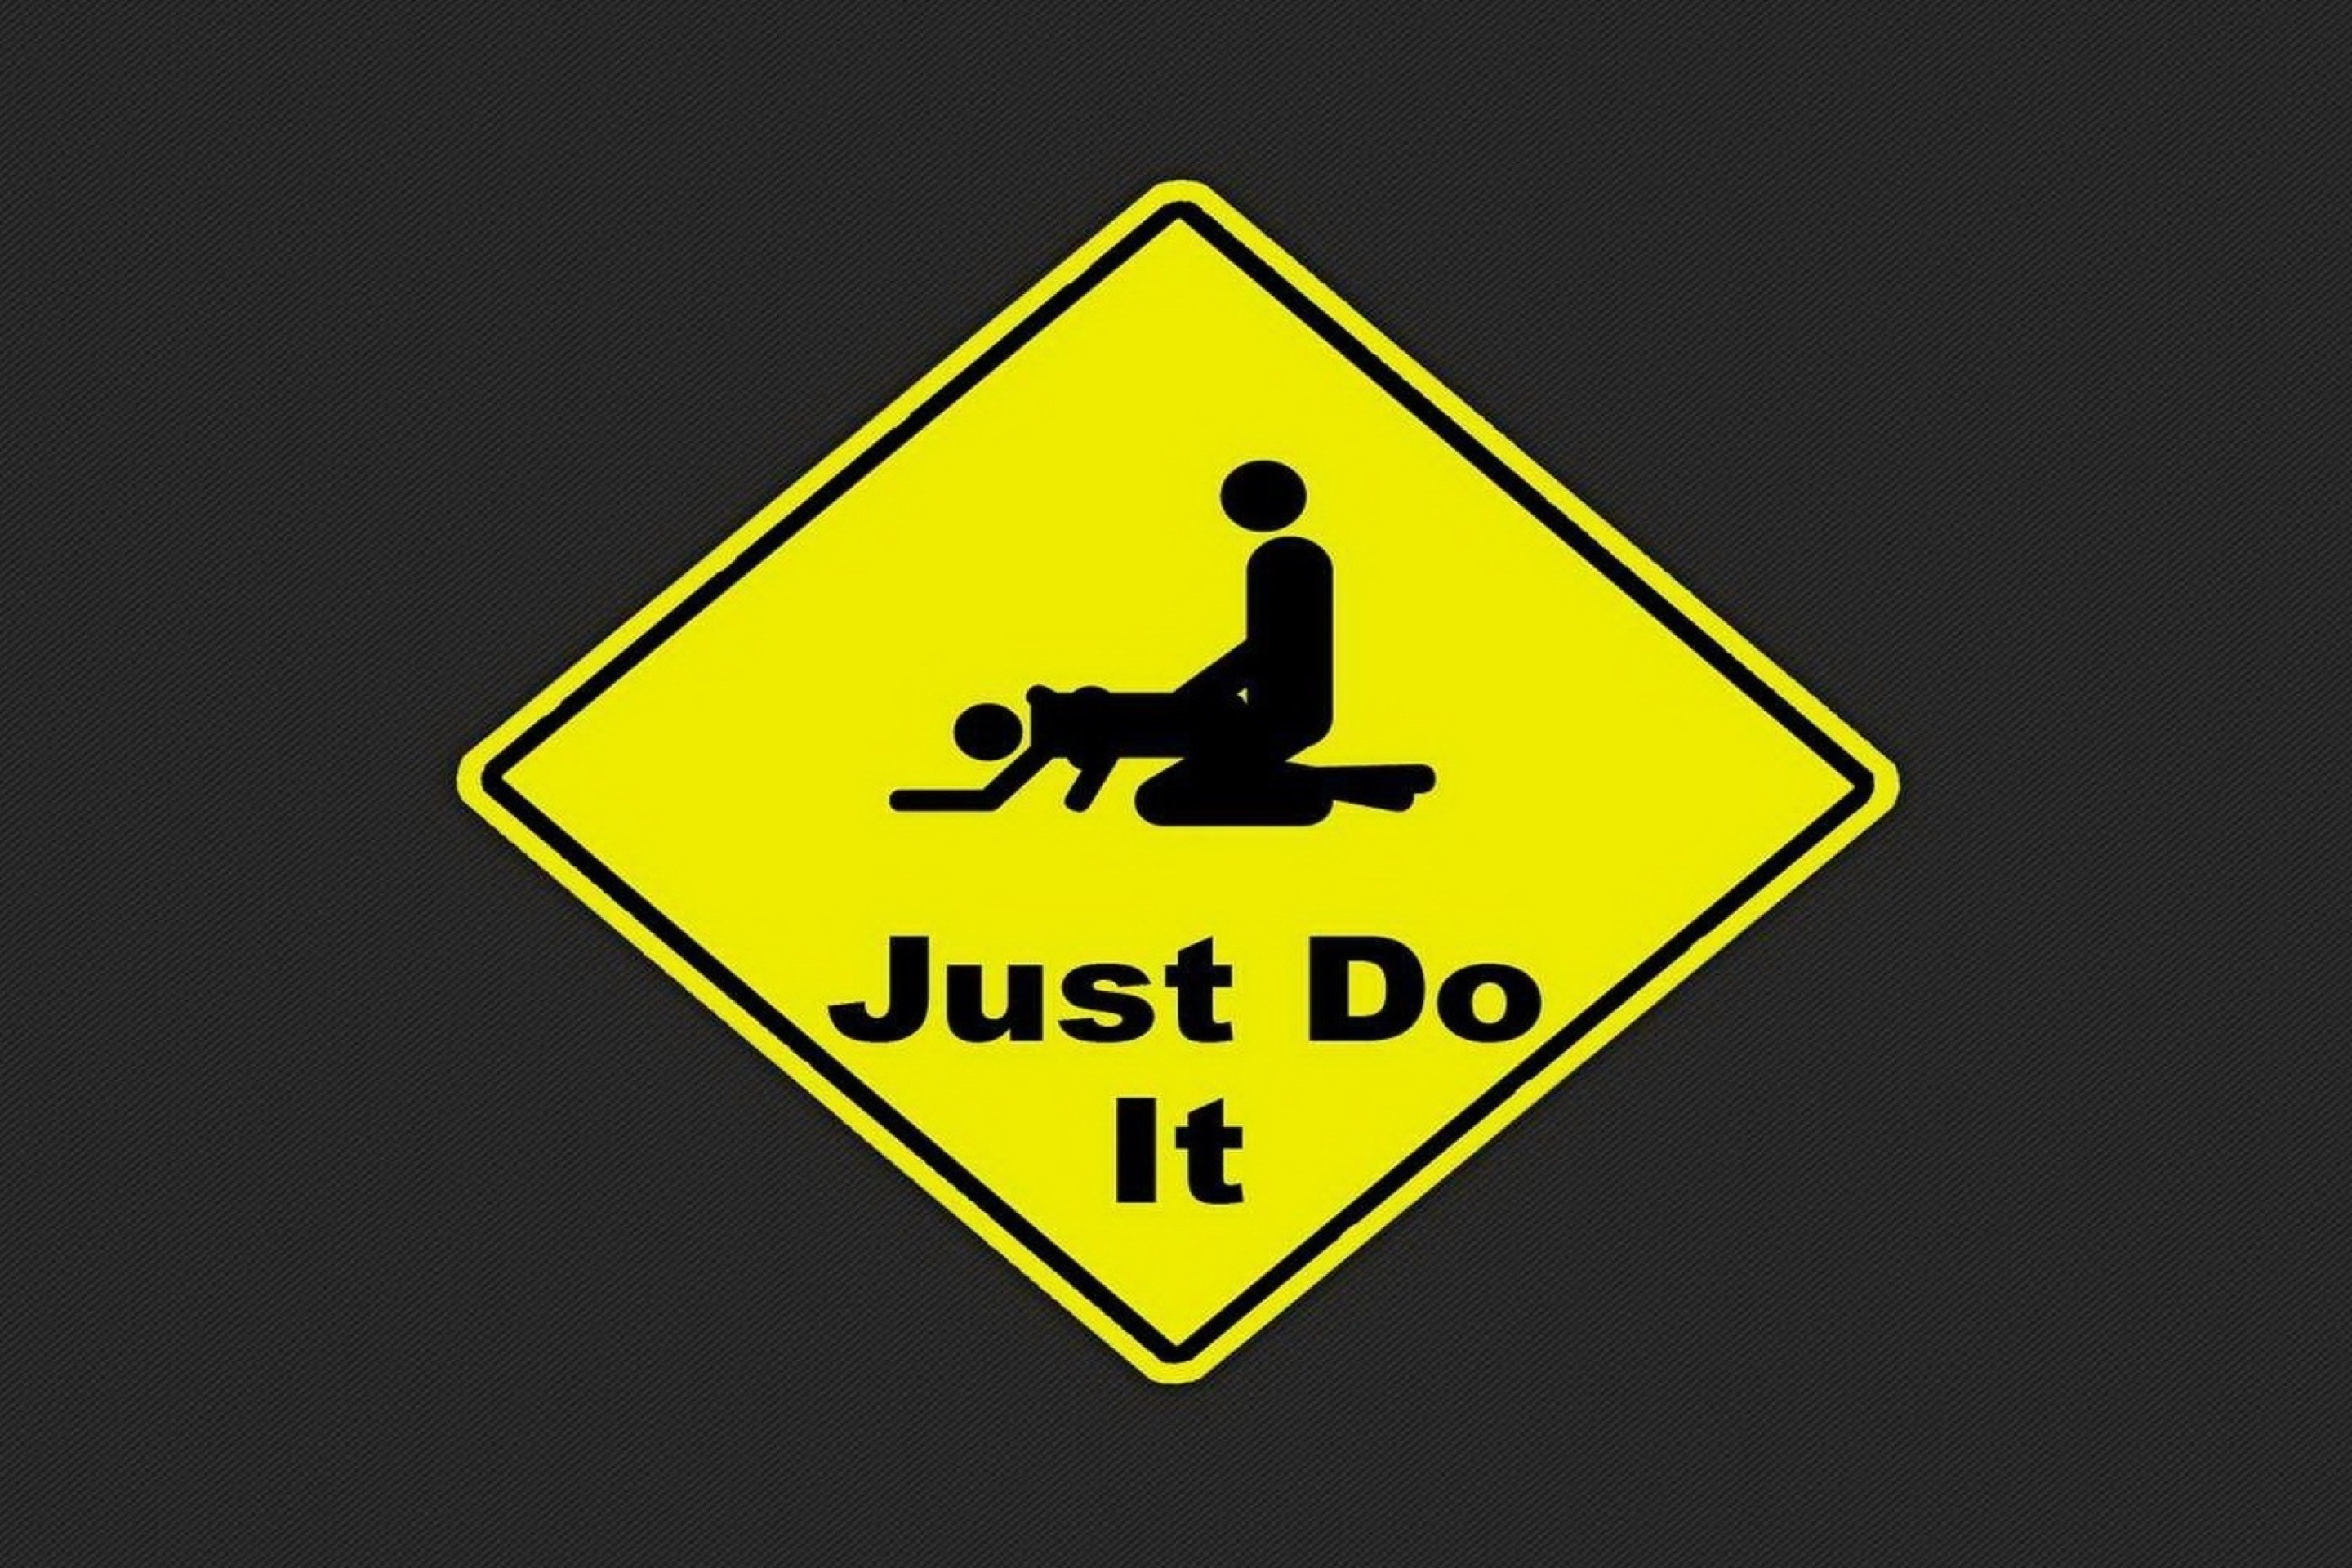 Just Do It Funny Sign wallpaper 2880x1920